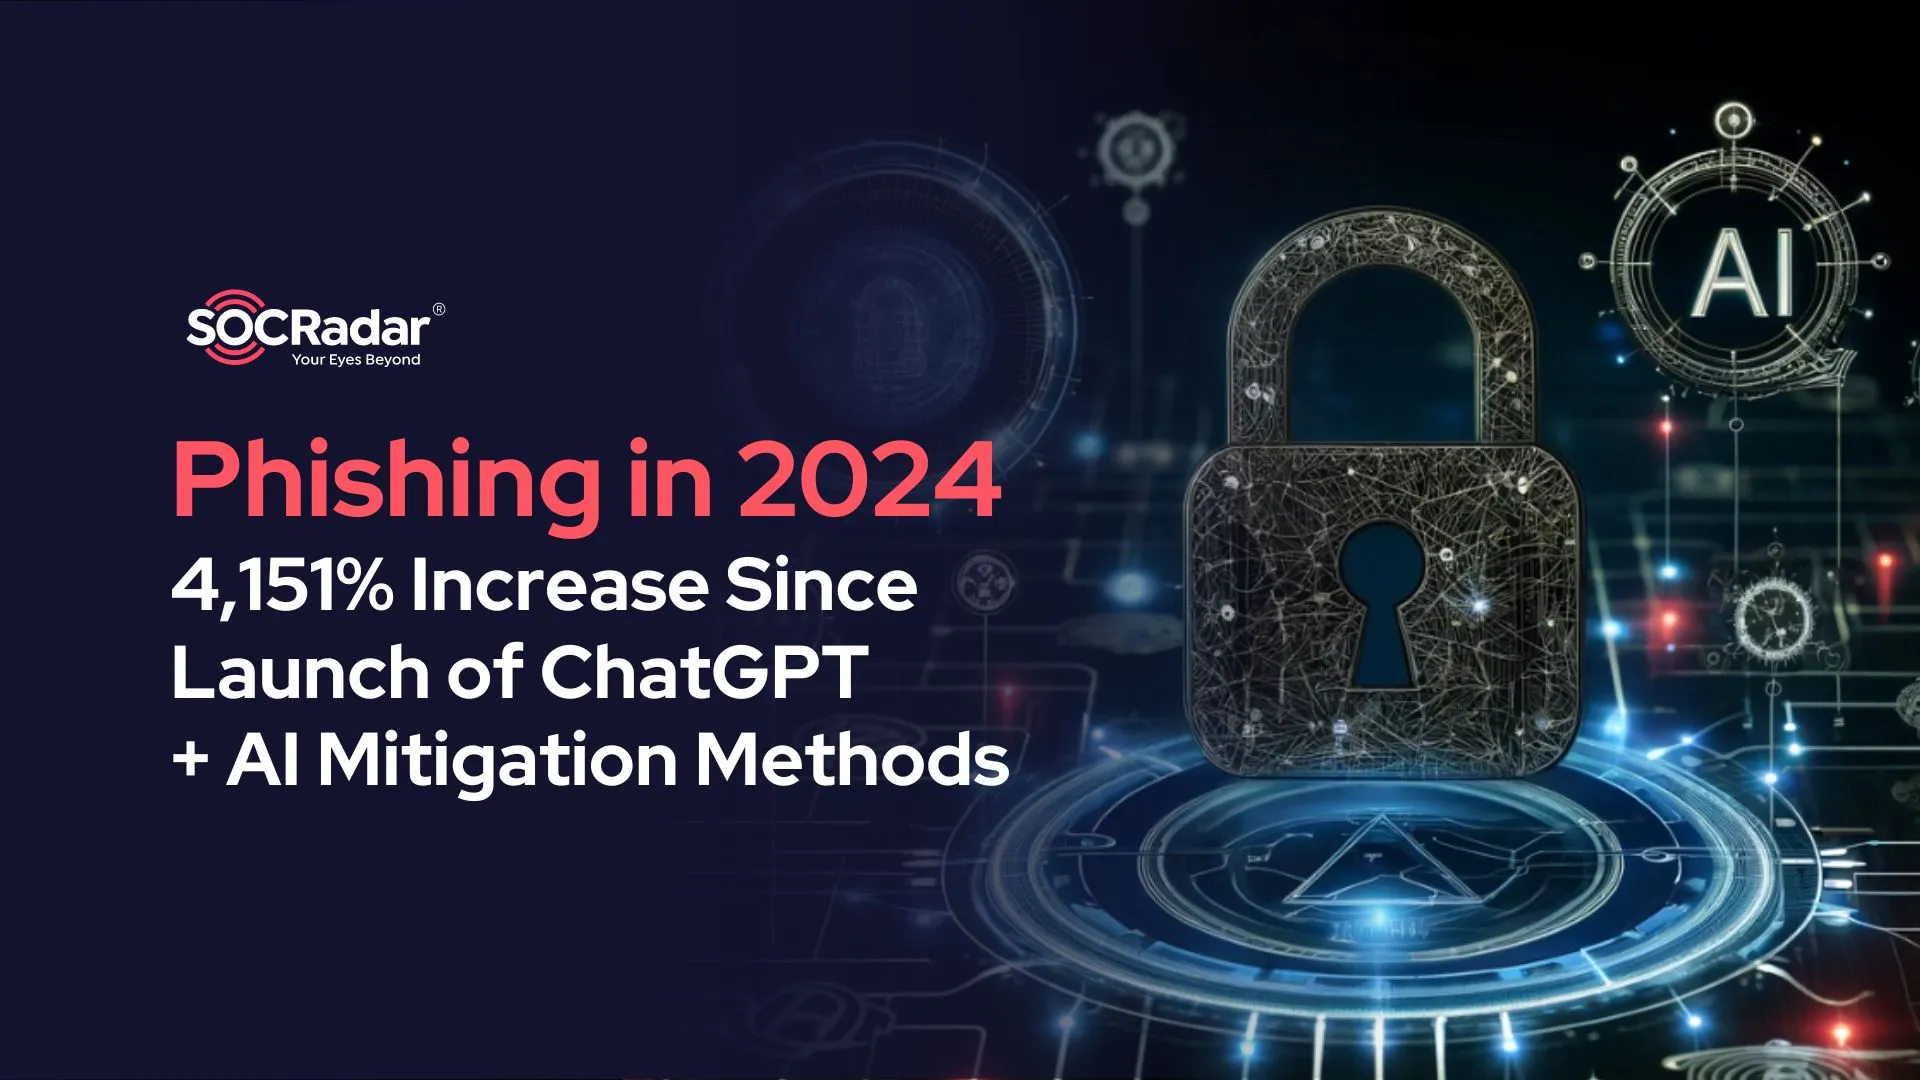 SOCRadar® Cyber Intelligence Inc. | Phishing in 2024: 4,151% Increase Since Launch of ChatGPT; AI Mitigation Methods